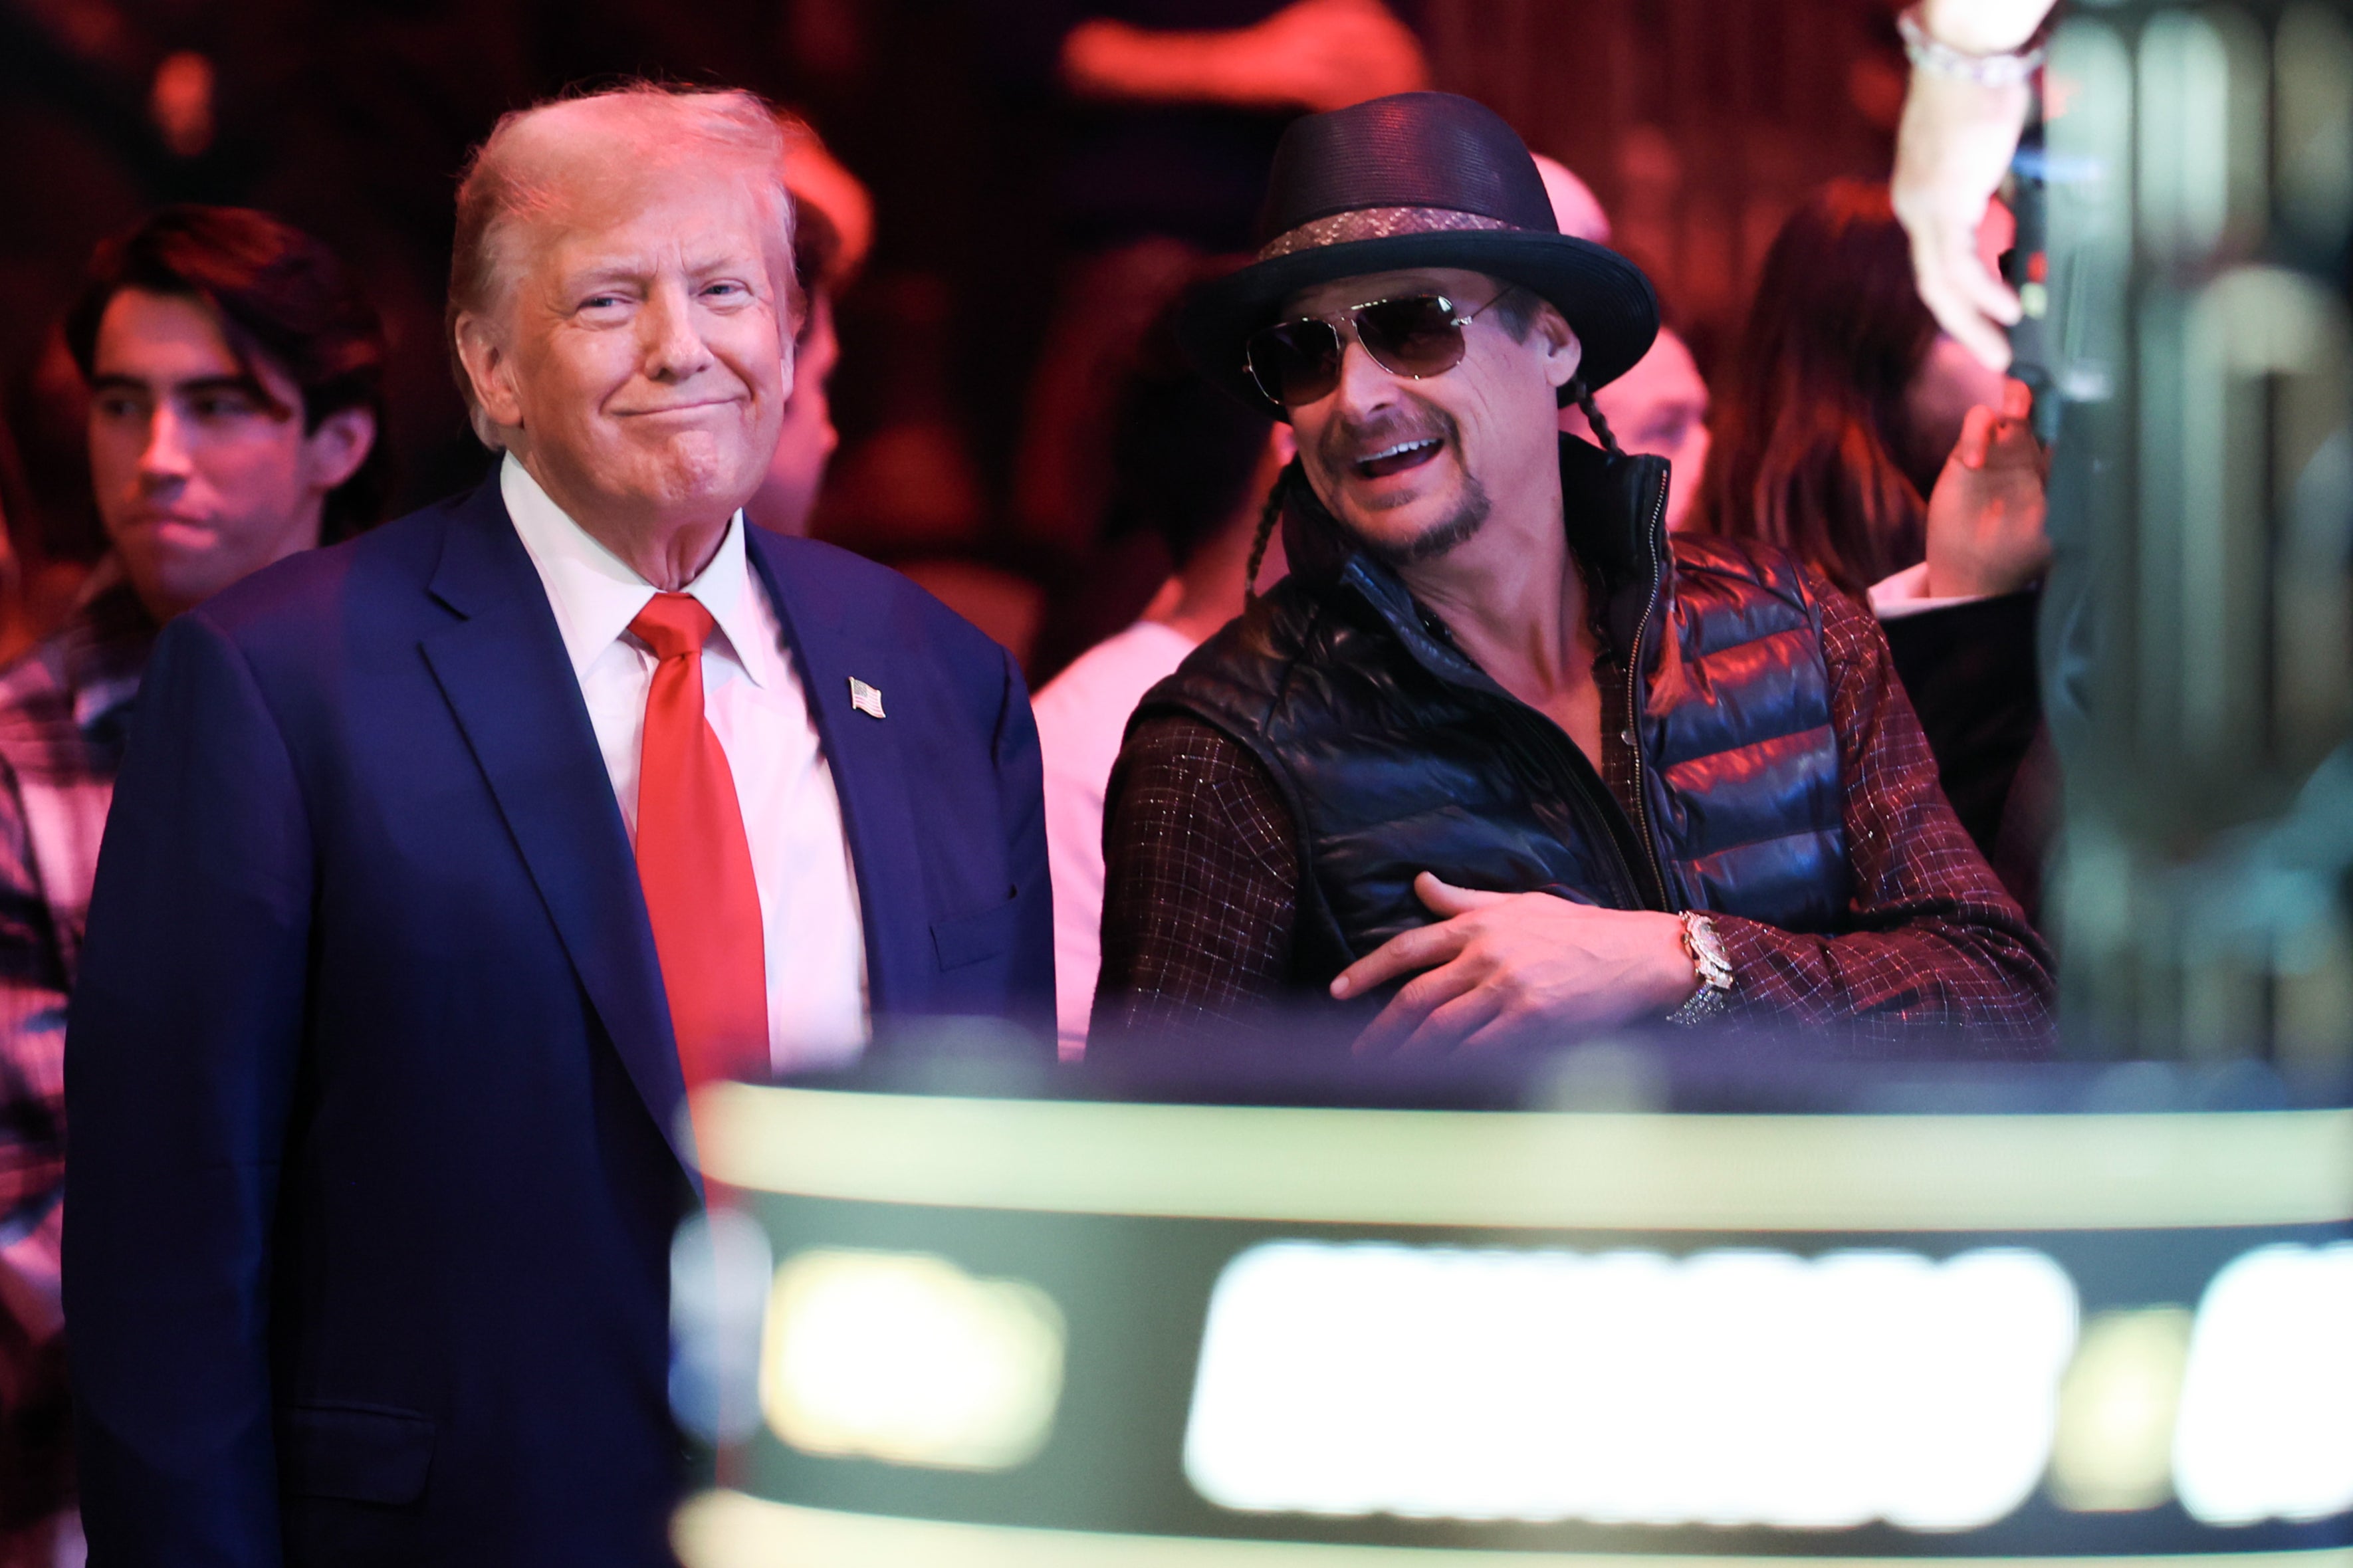 Kid Rock with Donald Trump at a UFC event in December. The MAGA loyalist is accused of using the n-word and waving a gun during a Rolling Stone interview